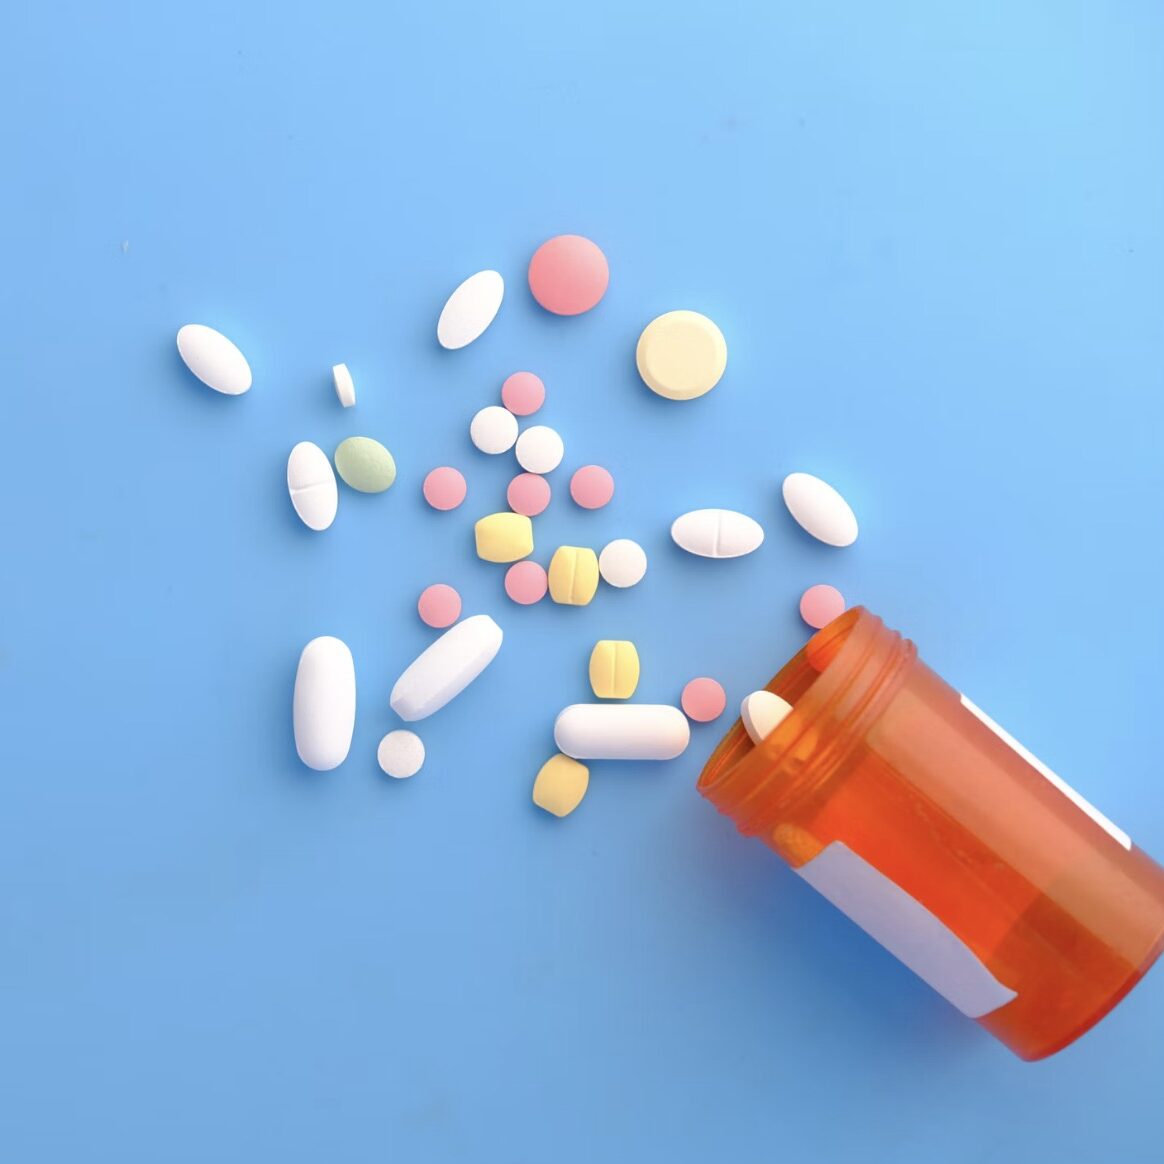 Bottle with medication pills